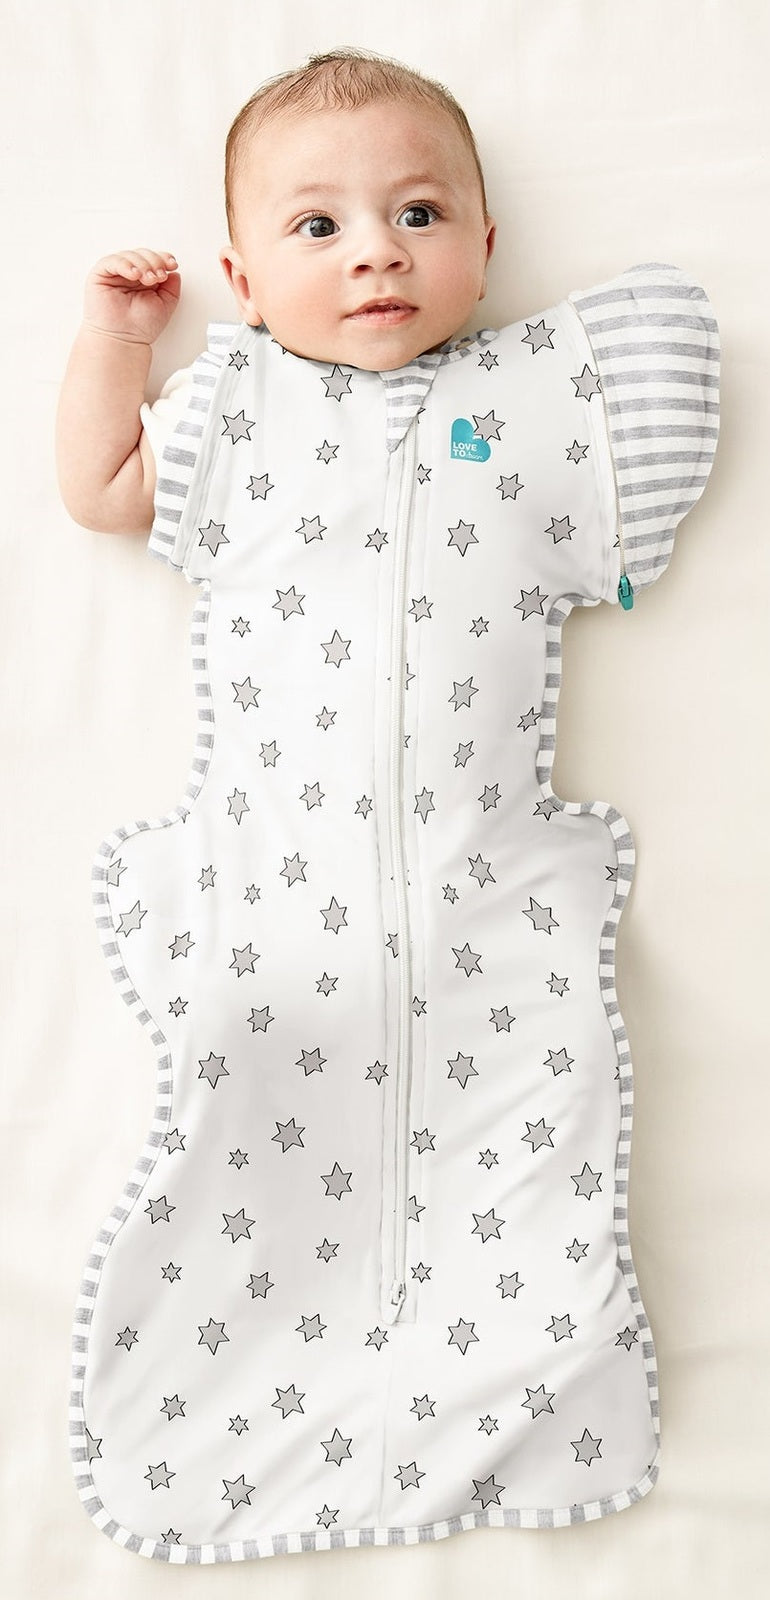 Love To Dream: Swaddle UP Transition Bag Bamboo Warm 0.2 TOG - Super Star (Large) (Suitable for 8.5-11kg)